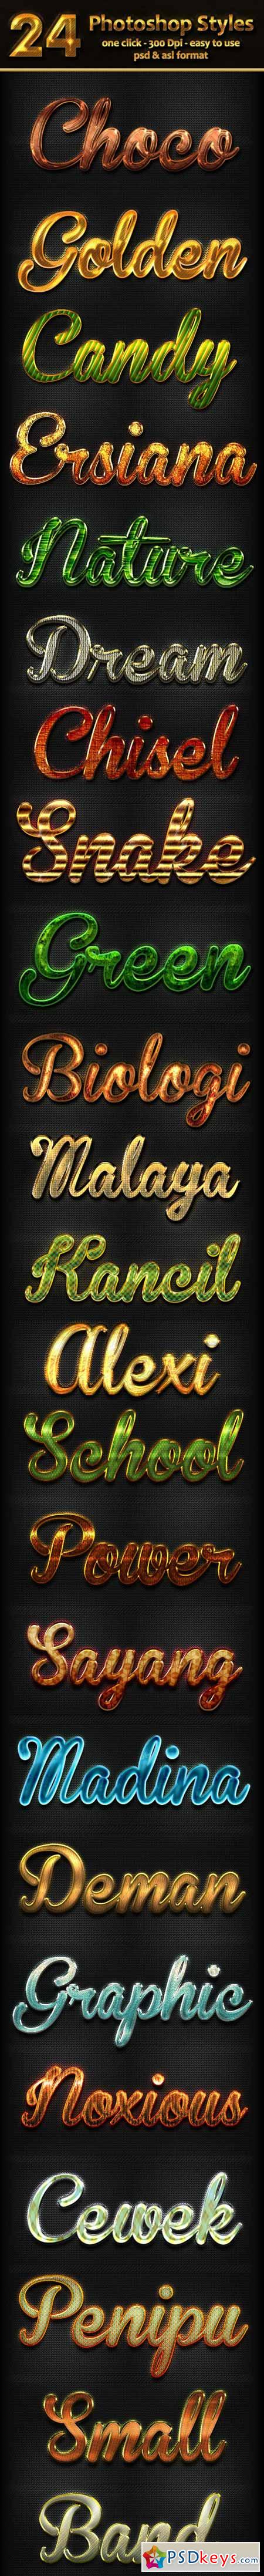 24 Photoshop Text Effect Styles 10314622